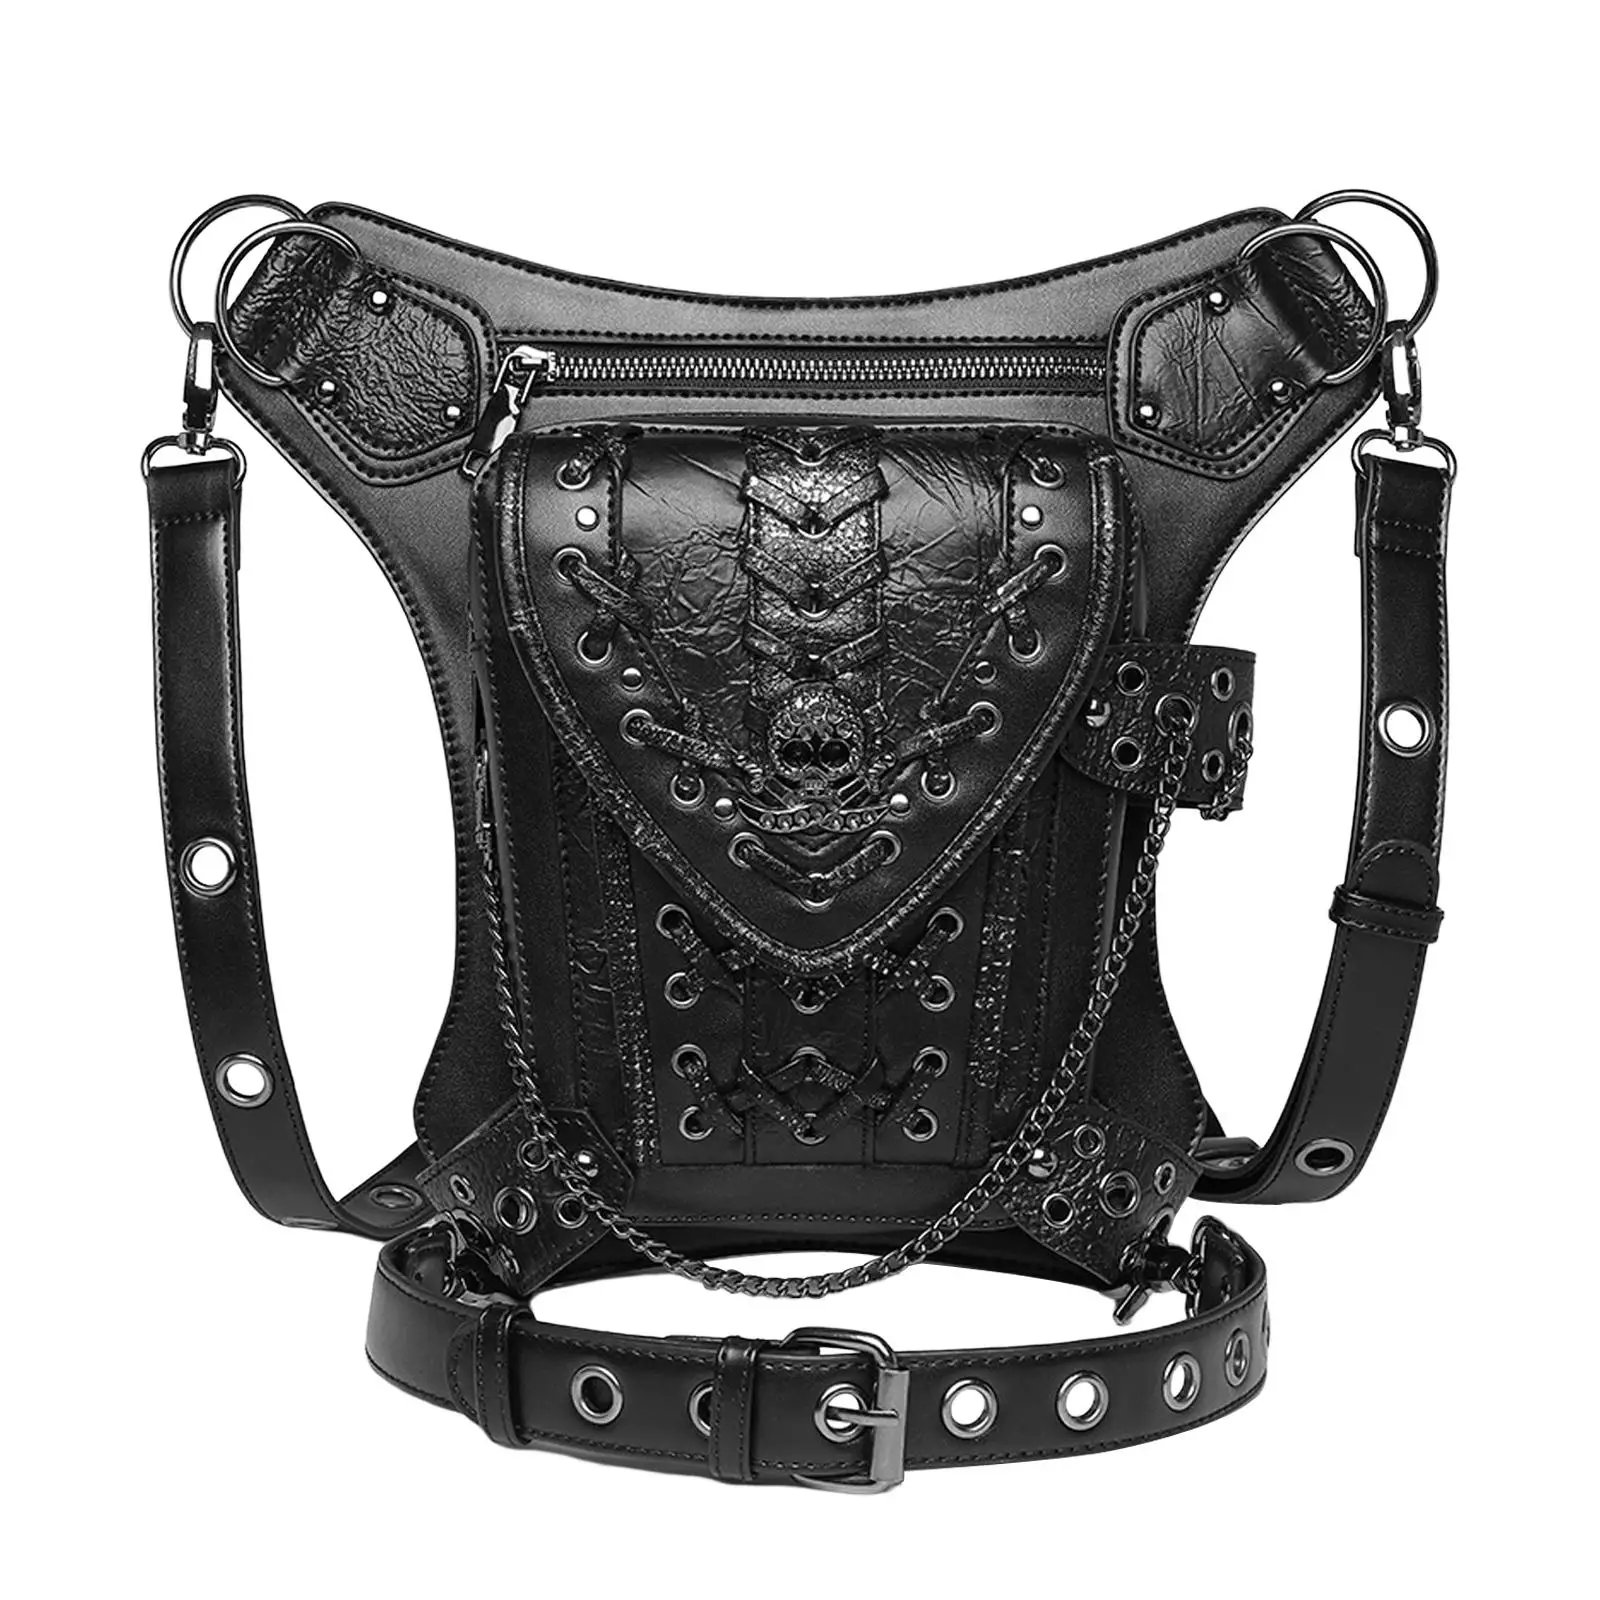 Retro Style Steampunk Waist Bags Pouch PU Leather Back Pack leg case for Motorcycle Bike Cycling Trekking Women Men